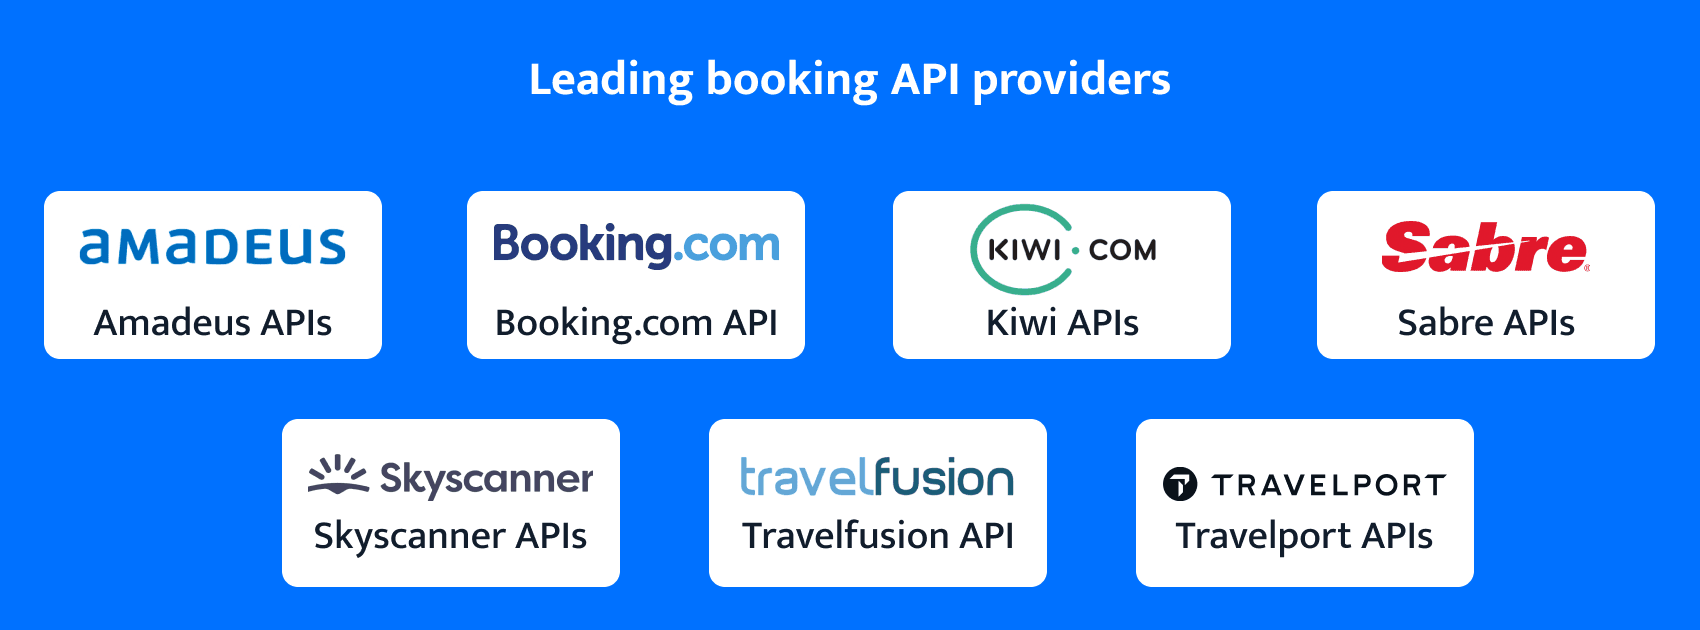 best travel booking API providers 